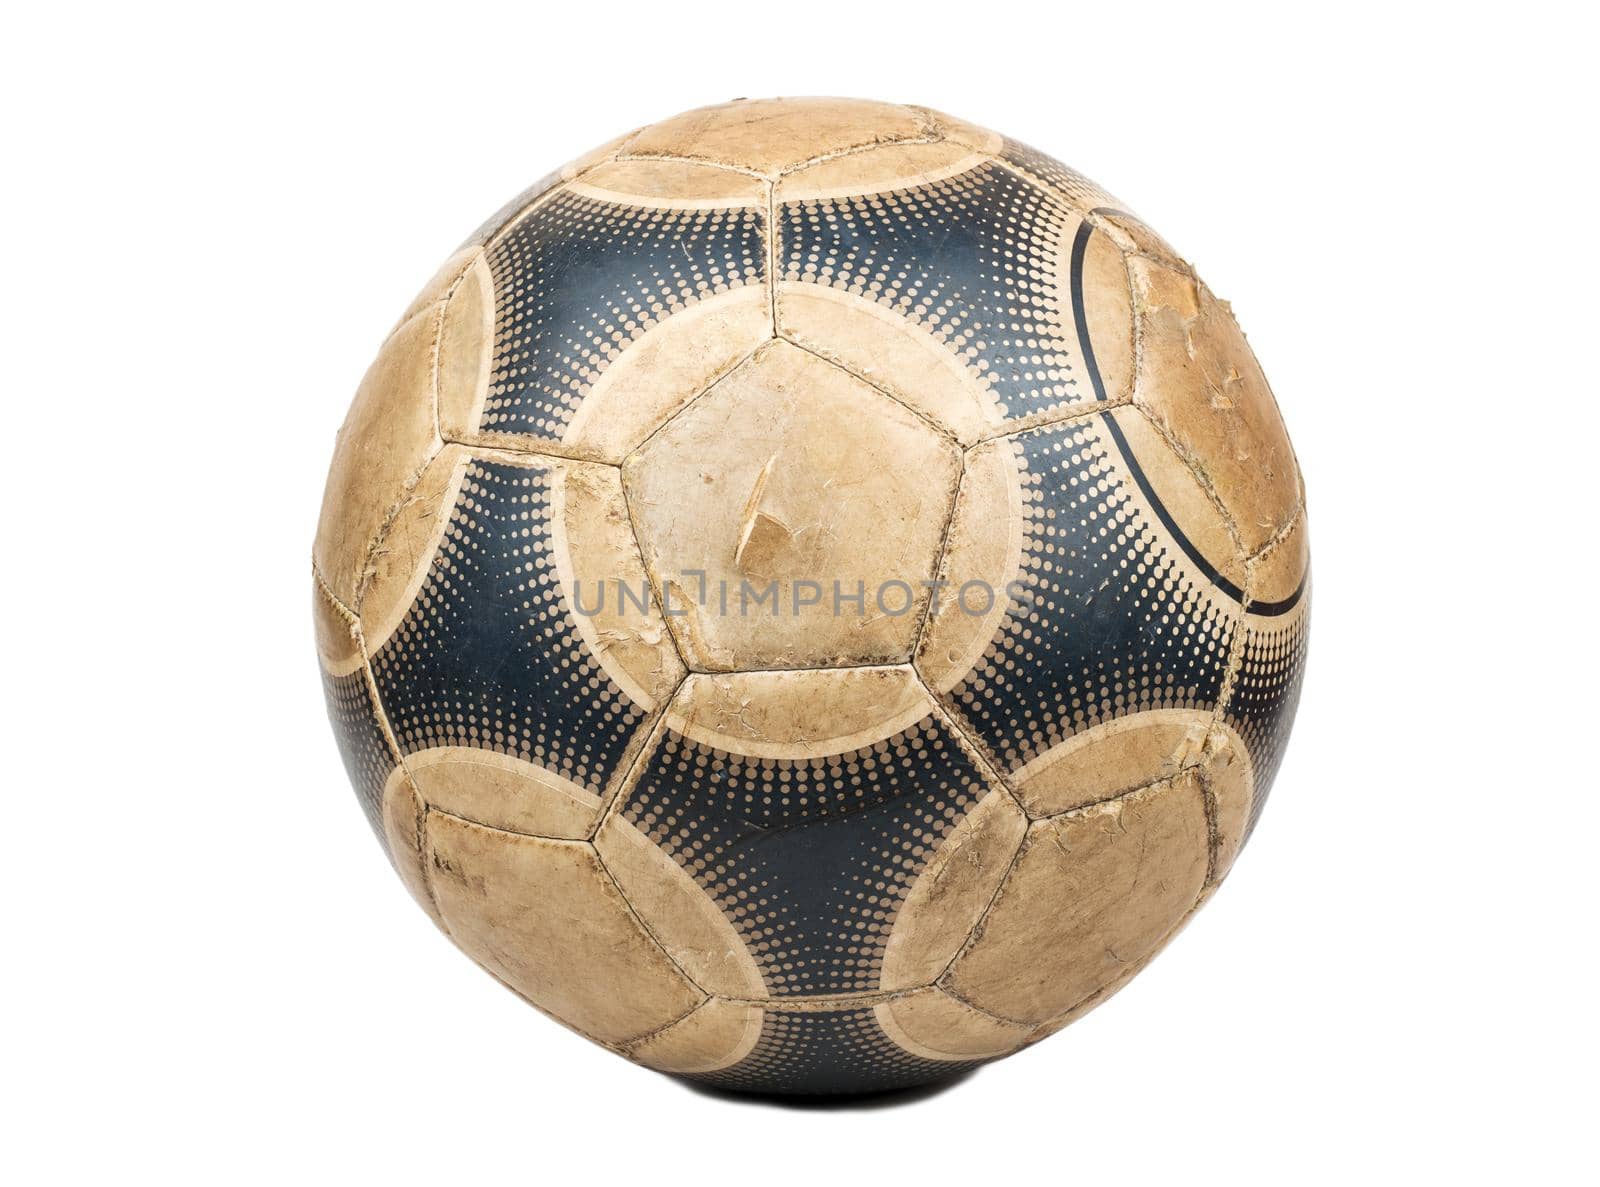 Old leather soccer ball isolated on white background